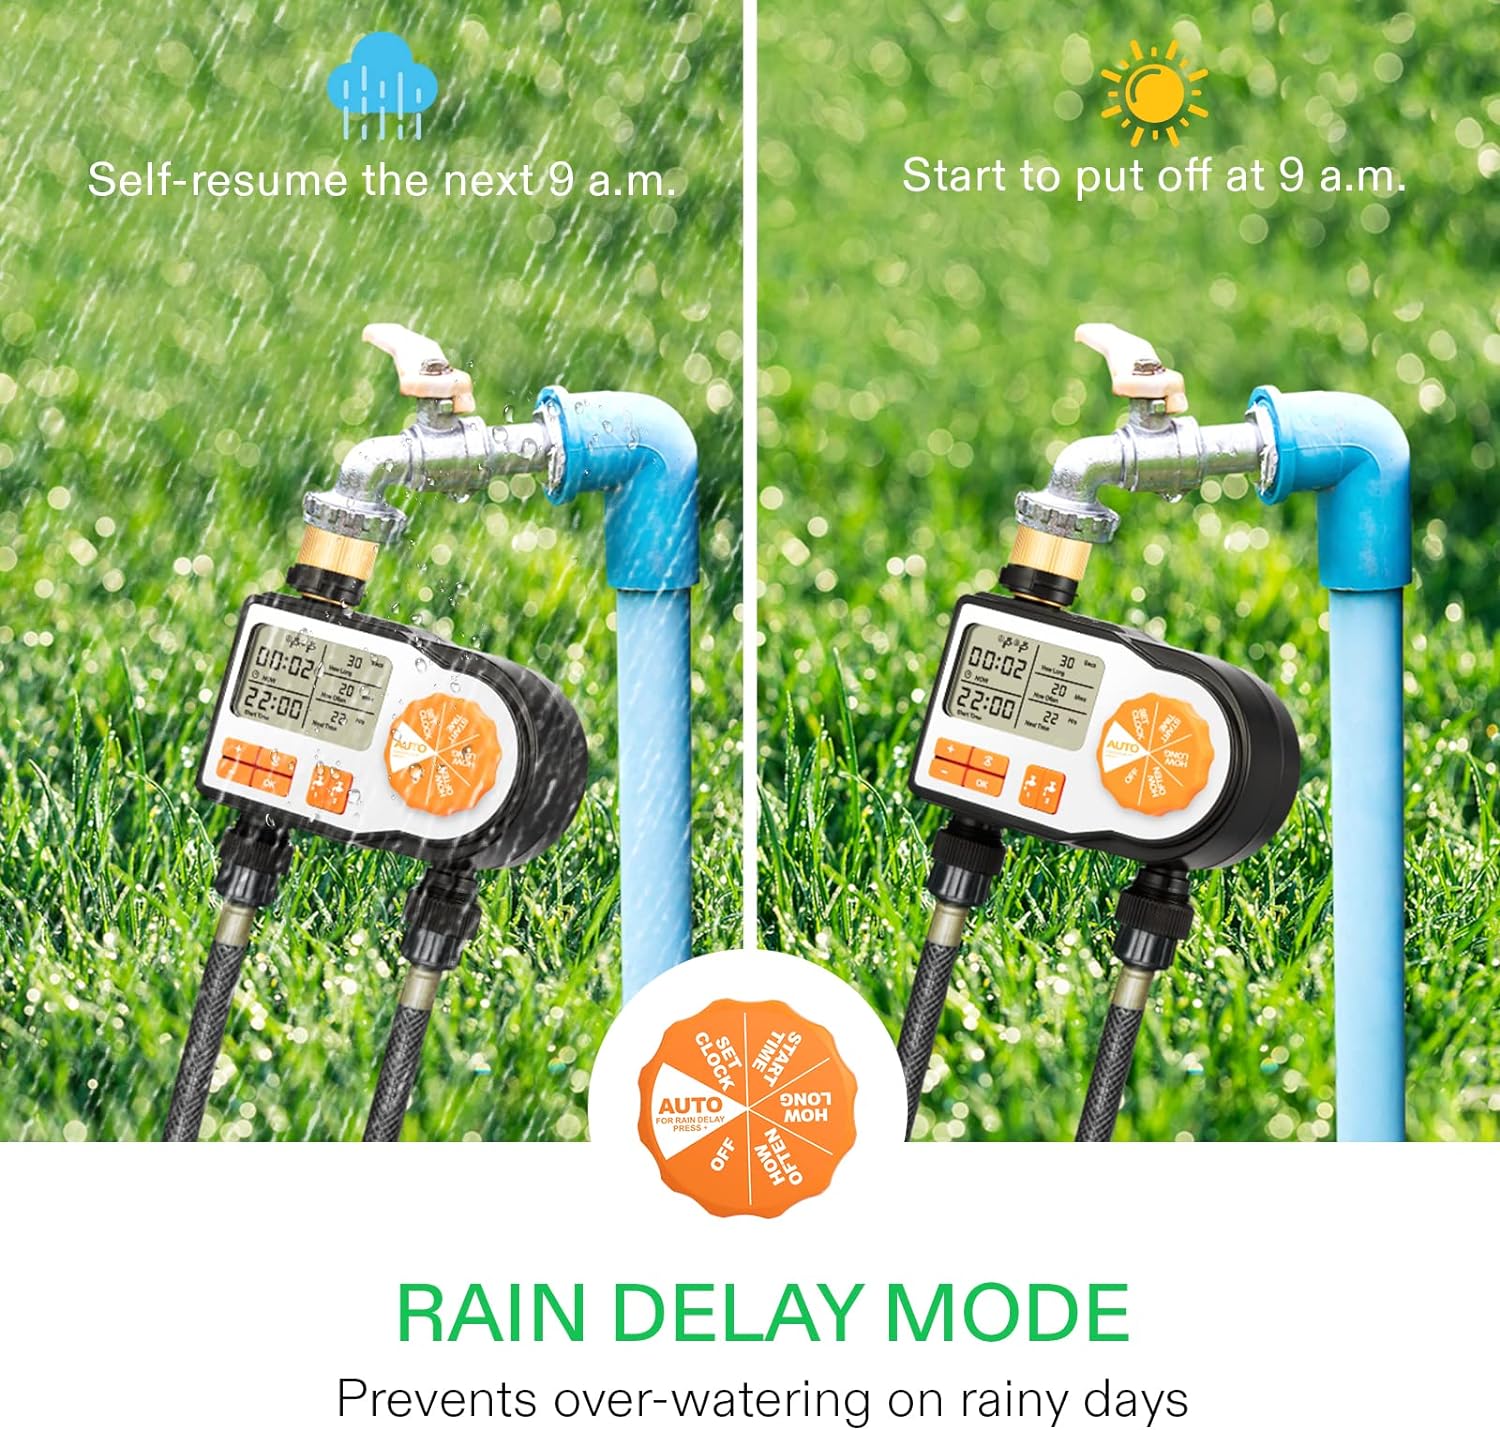 VIVOSUN Sprinkler Timer, Digital Programmable Watering Timer / Hose Timer with 2 Independent Outlets for Outdoor Faucets, Drip Irrigati